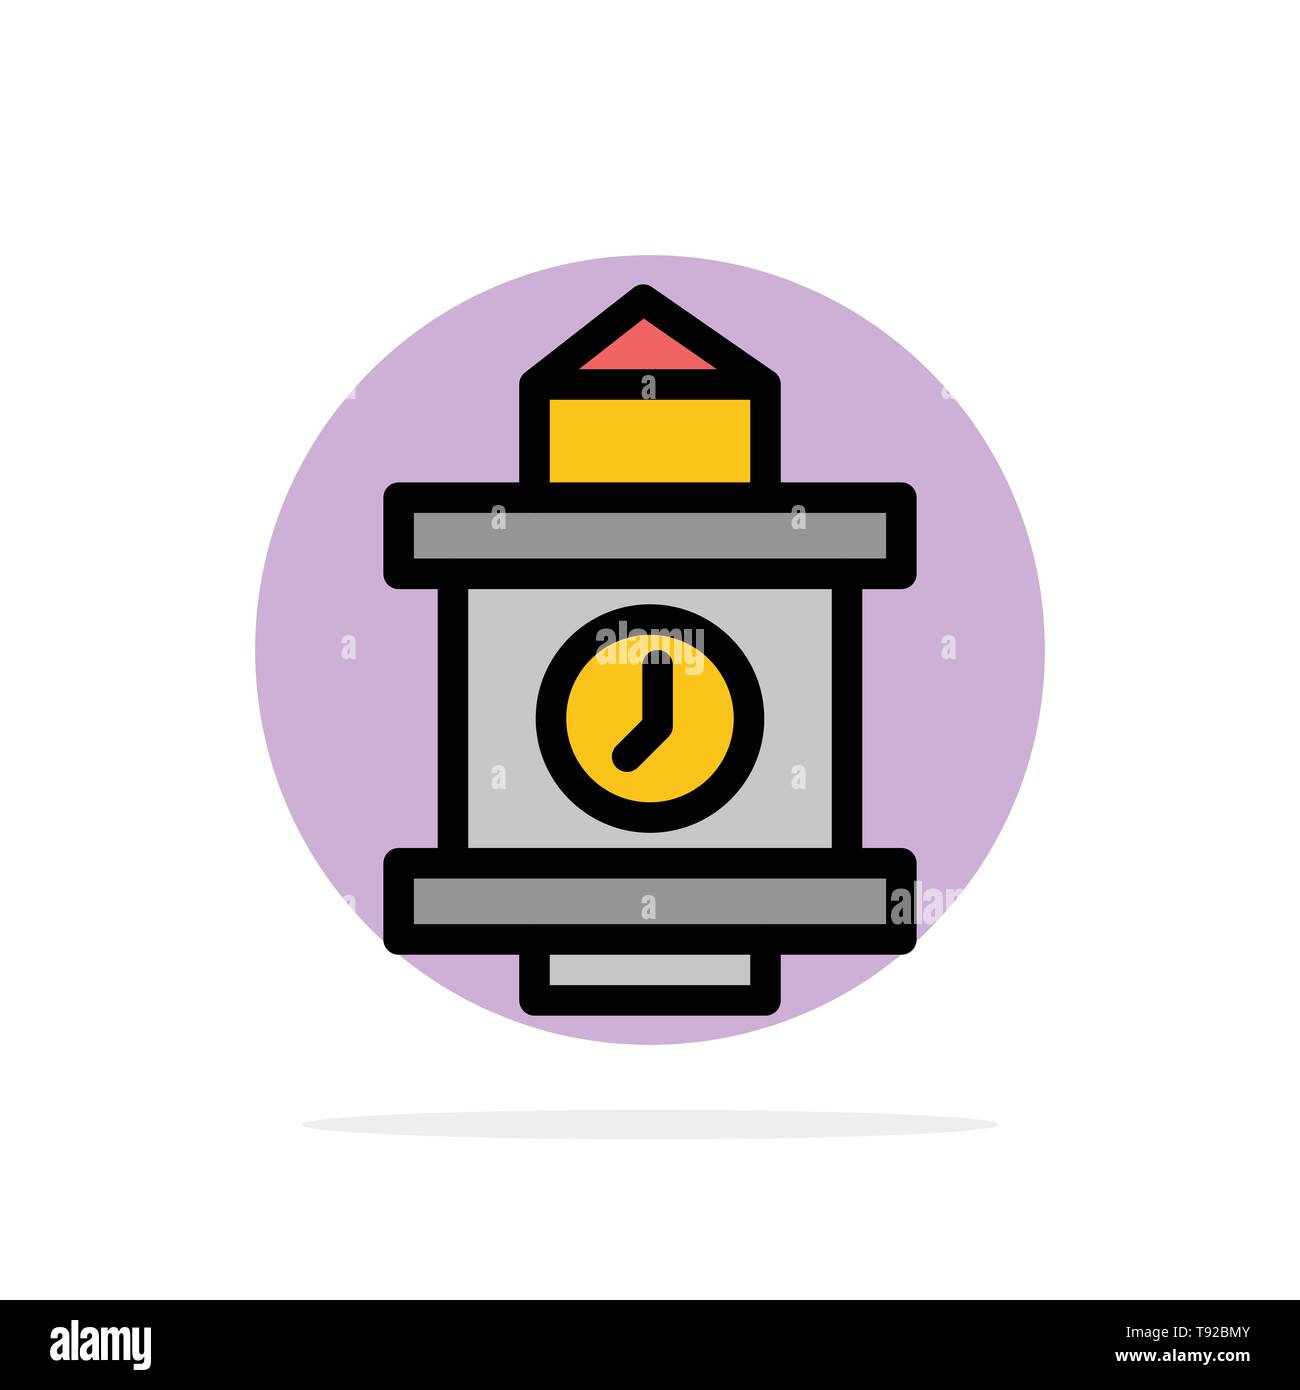 Train, Time, Station Abstract Circle Background Flat color Icon Stock Vector